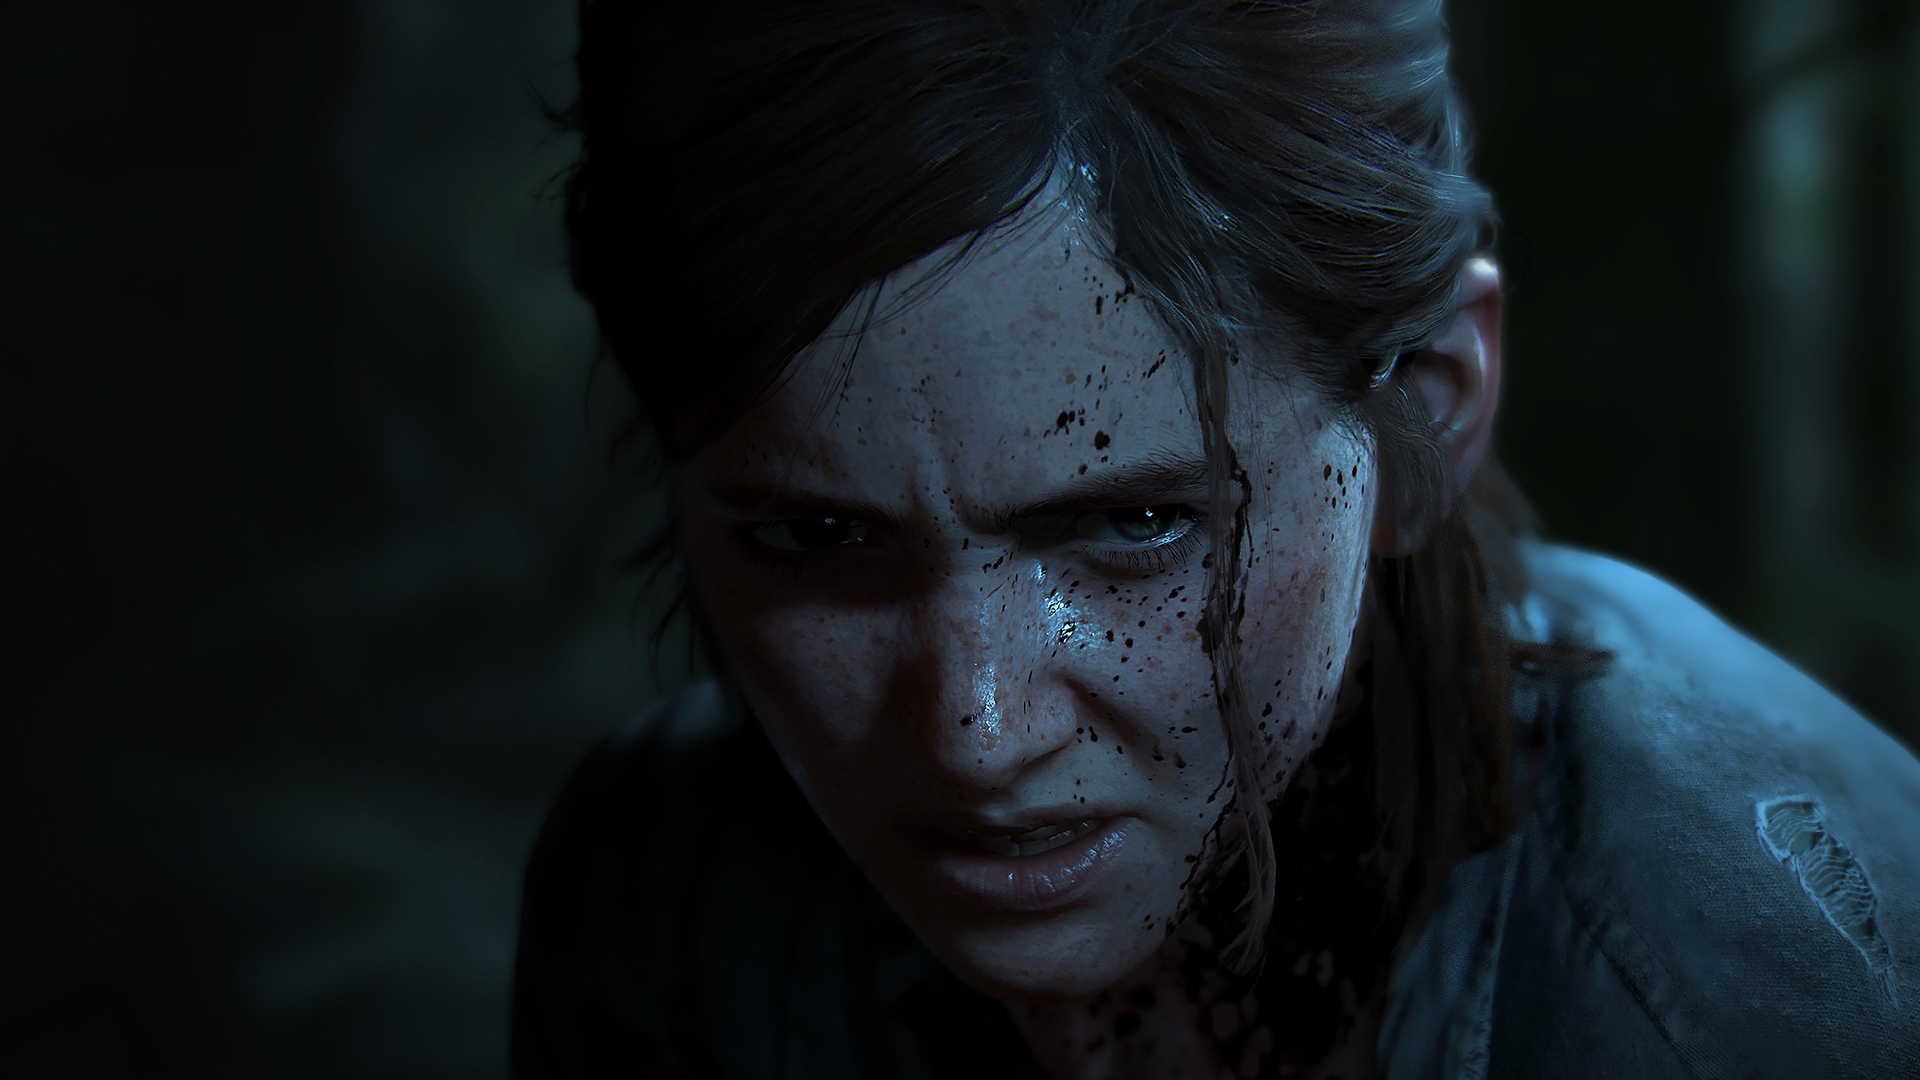 Opinion - Trailer - Last of Us Part 2's Shannon Woodward on Playing Dina  and Working with Naughty Dog